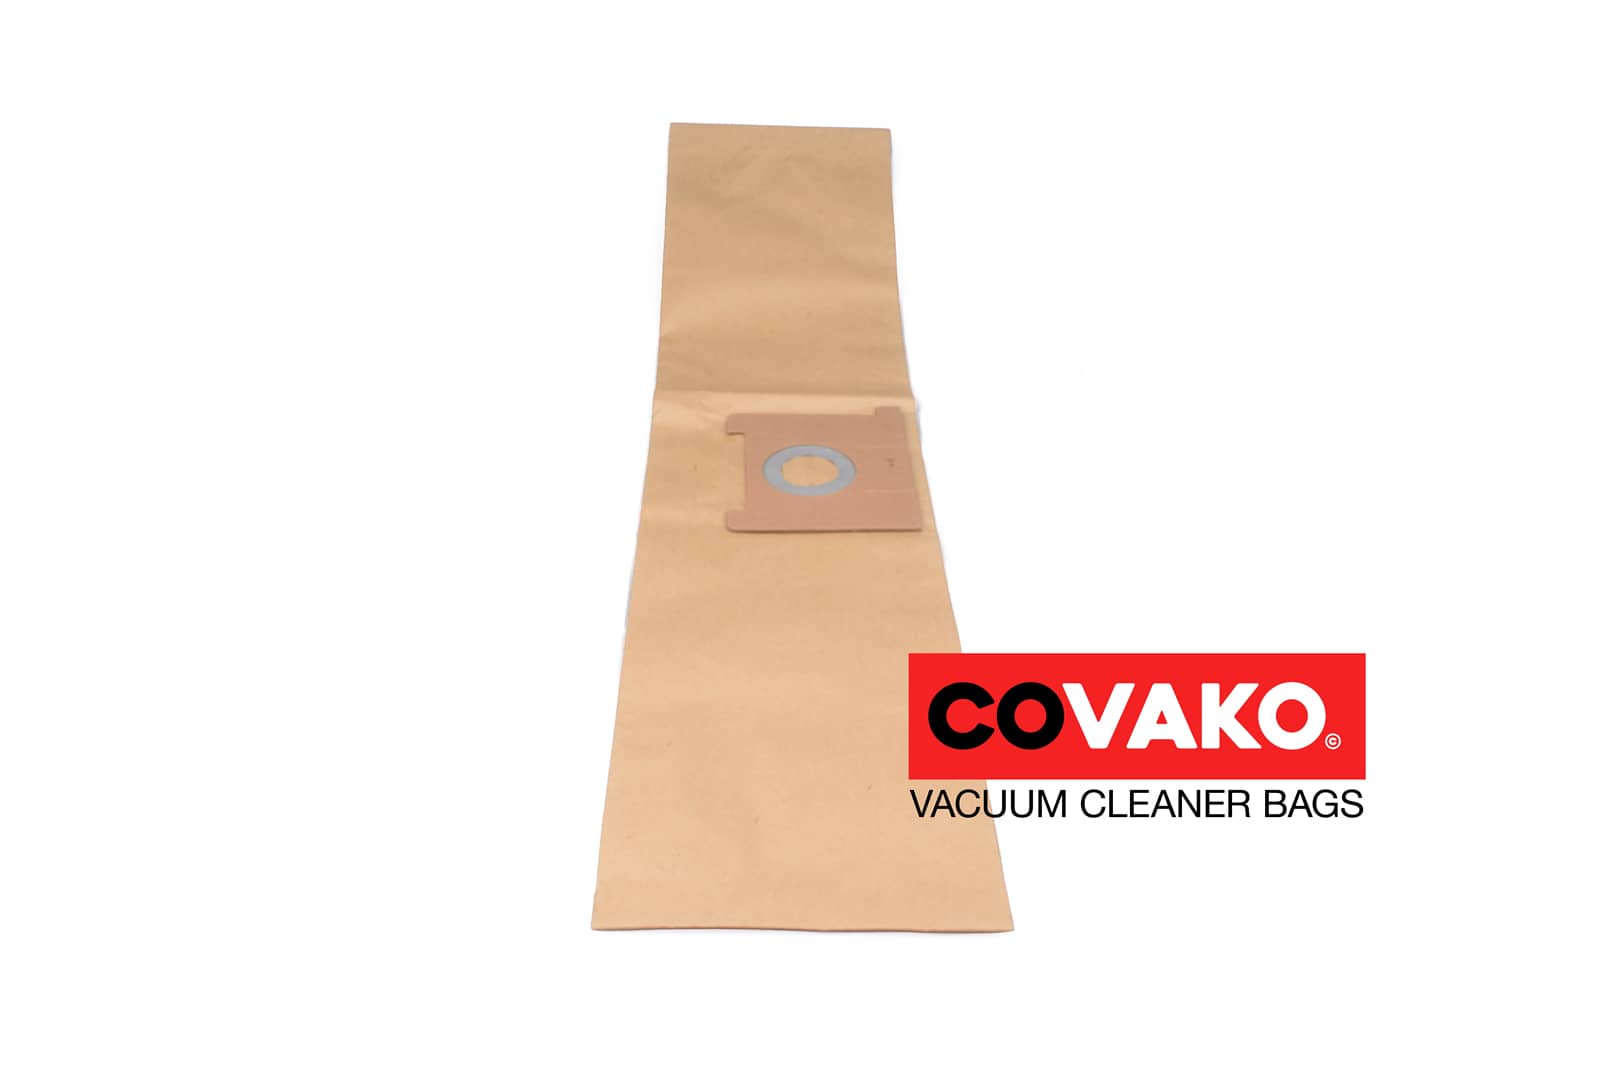 Fast Compacto 9 / Paper - Fast vacuum cleaner bags